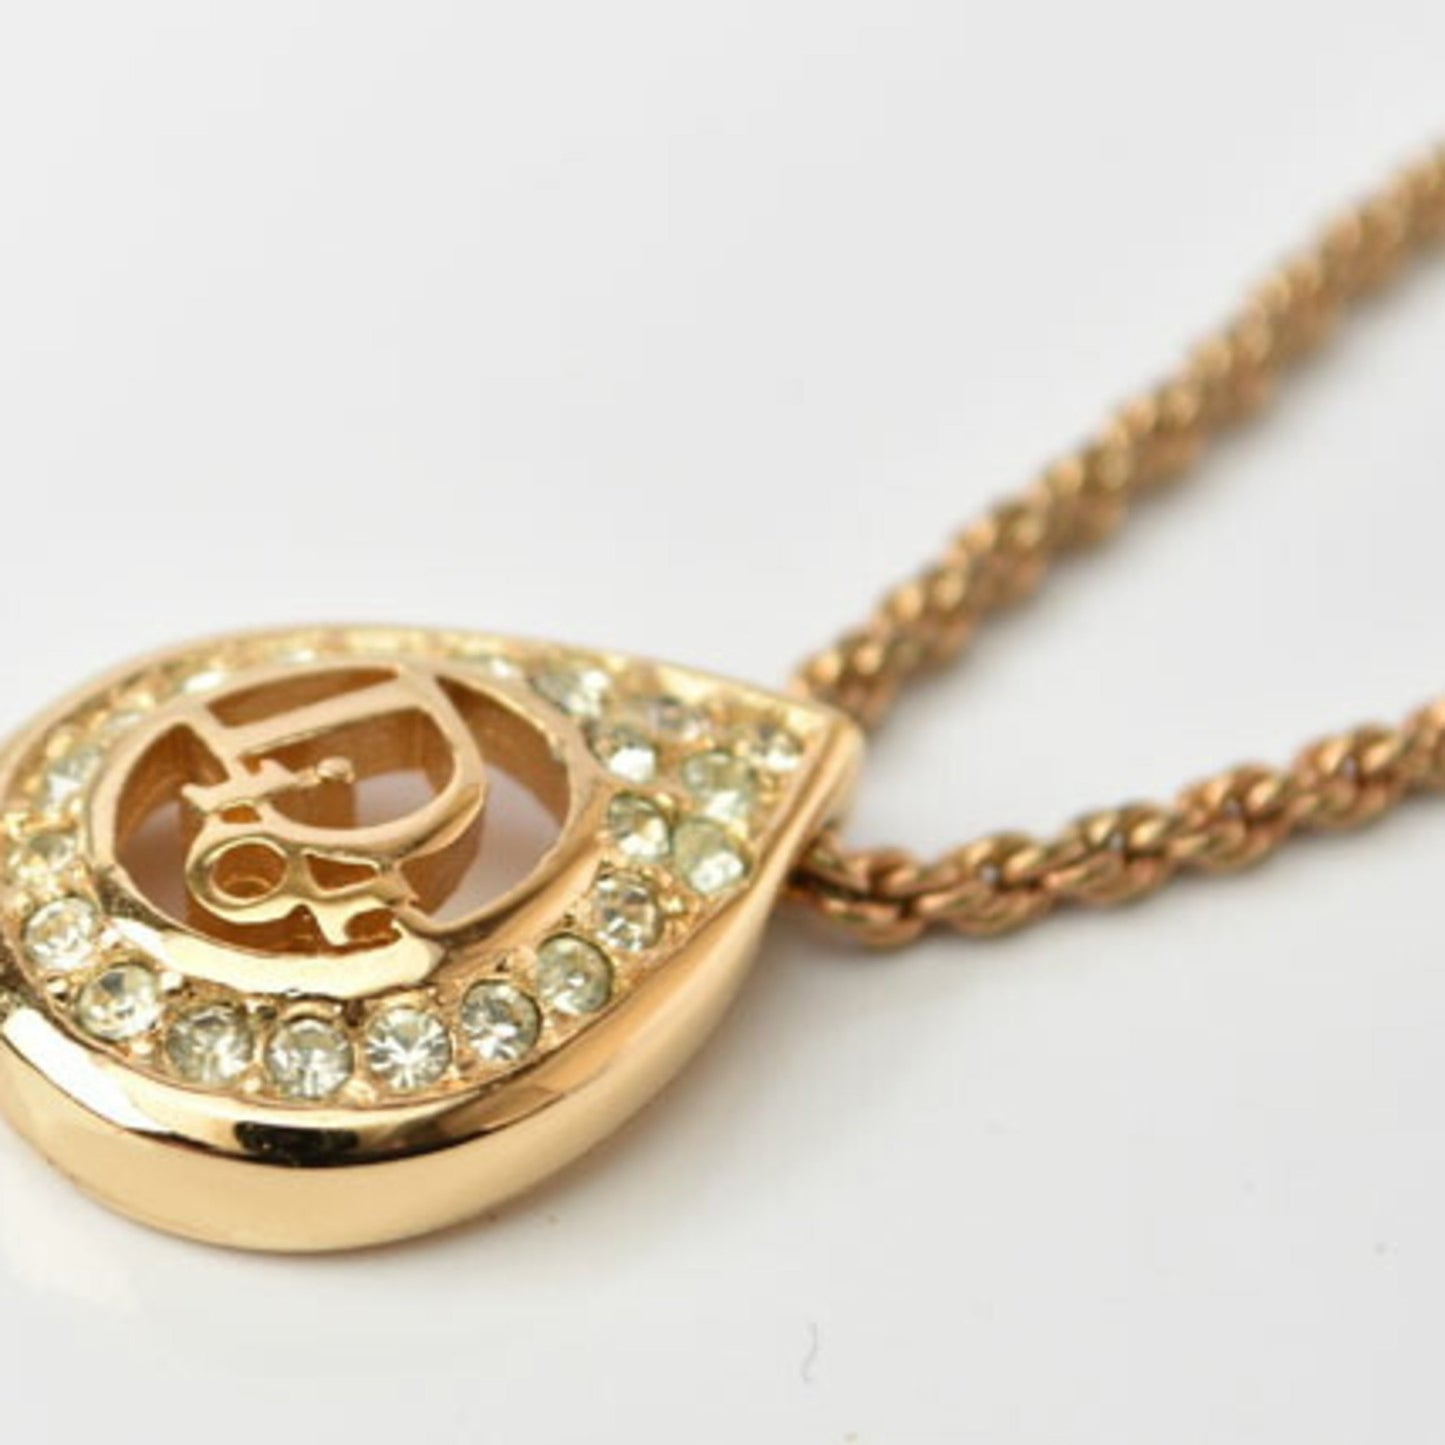 Dior Women's Gold Metal Pendant Necklace in Gold